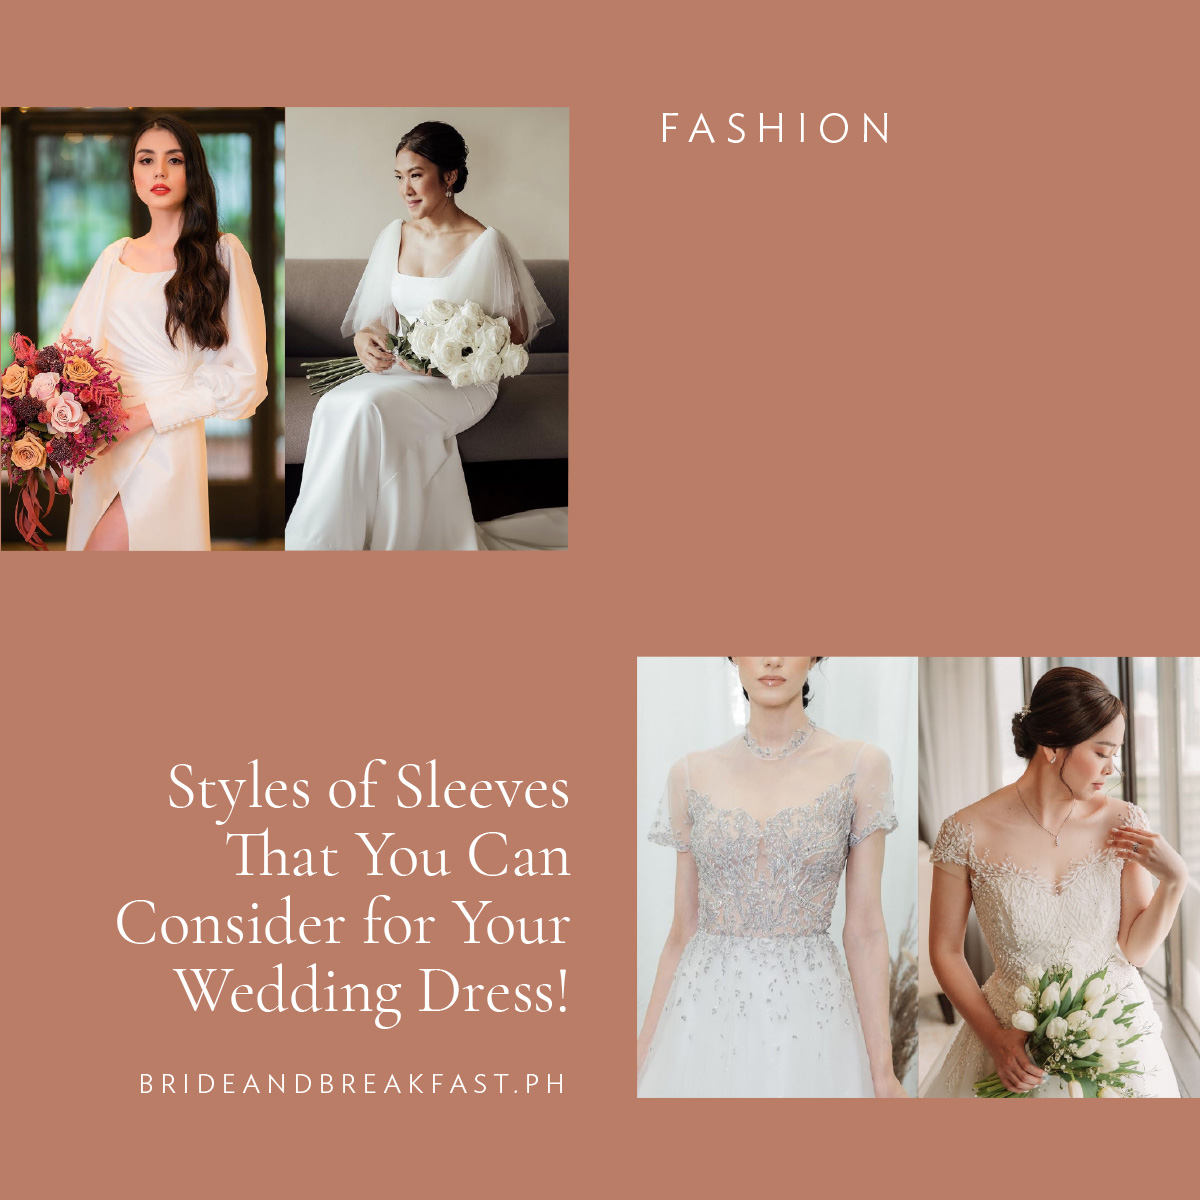 8 Styles of Sleeves That You Can Consider for Your Wedding Dress!